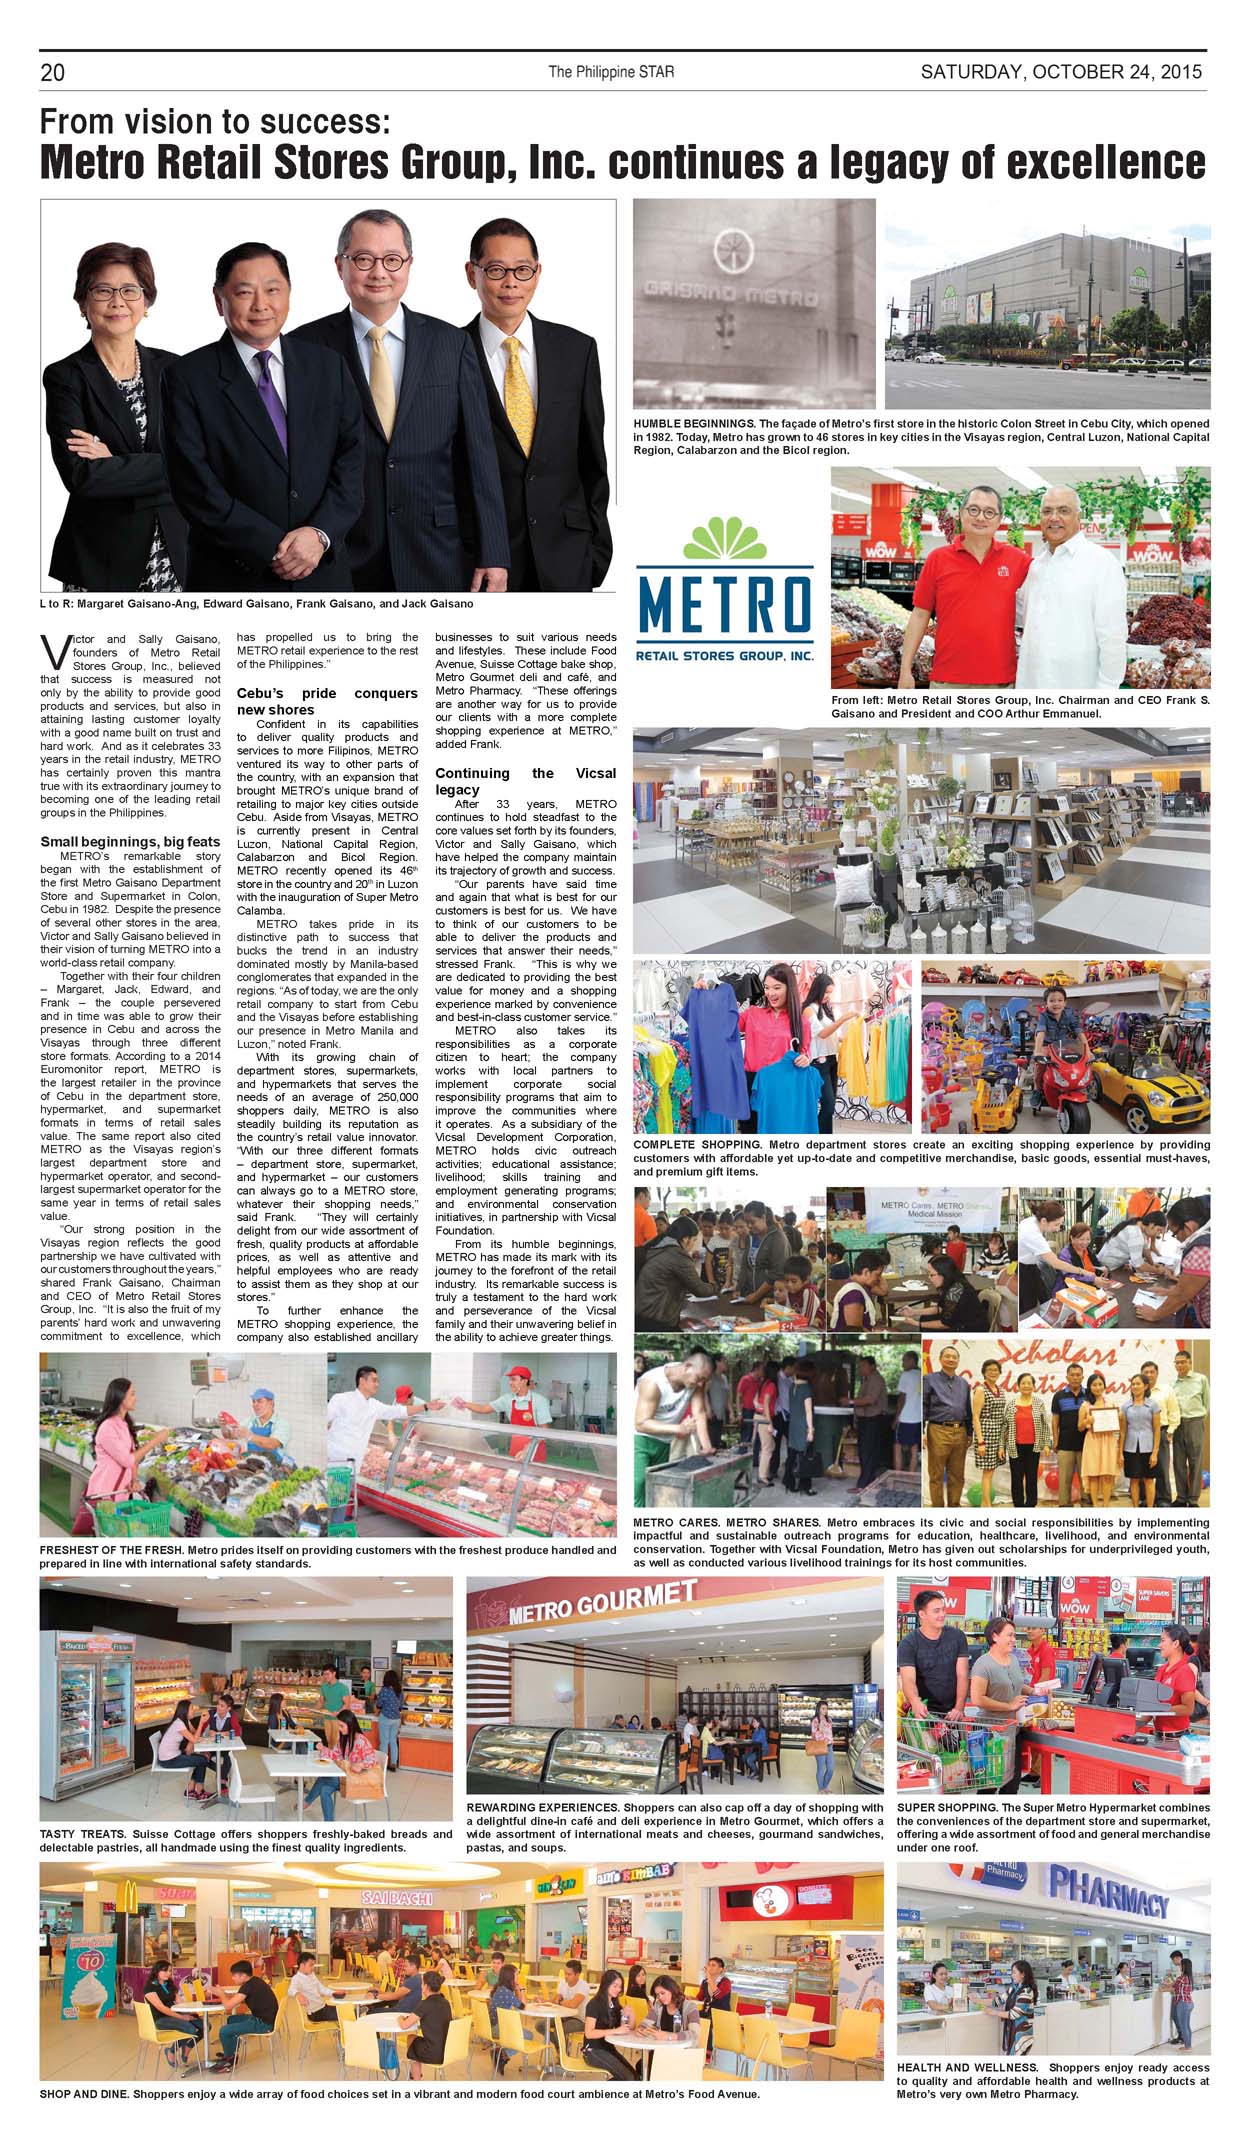 From vision to success Metro Retail Stores Group Inc. continues a legacy of excellence The Philippine Star